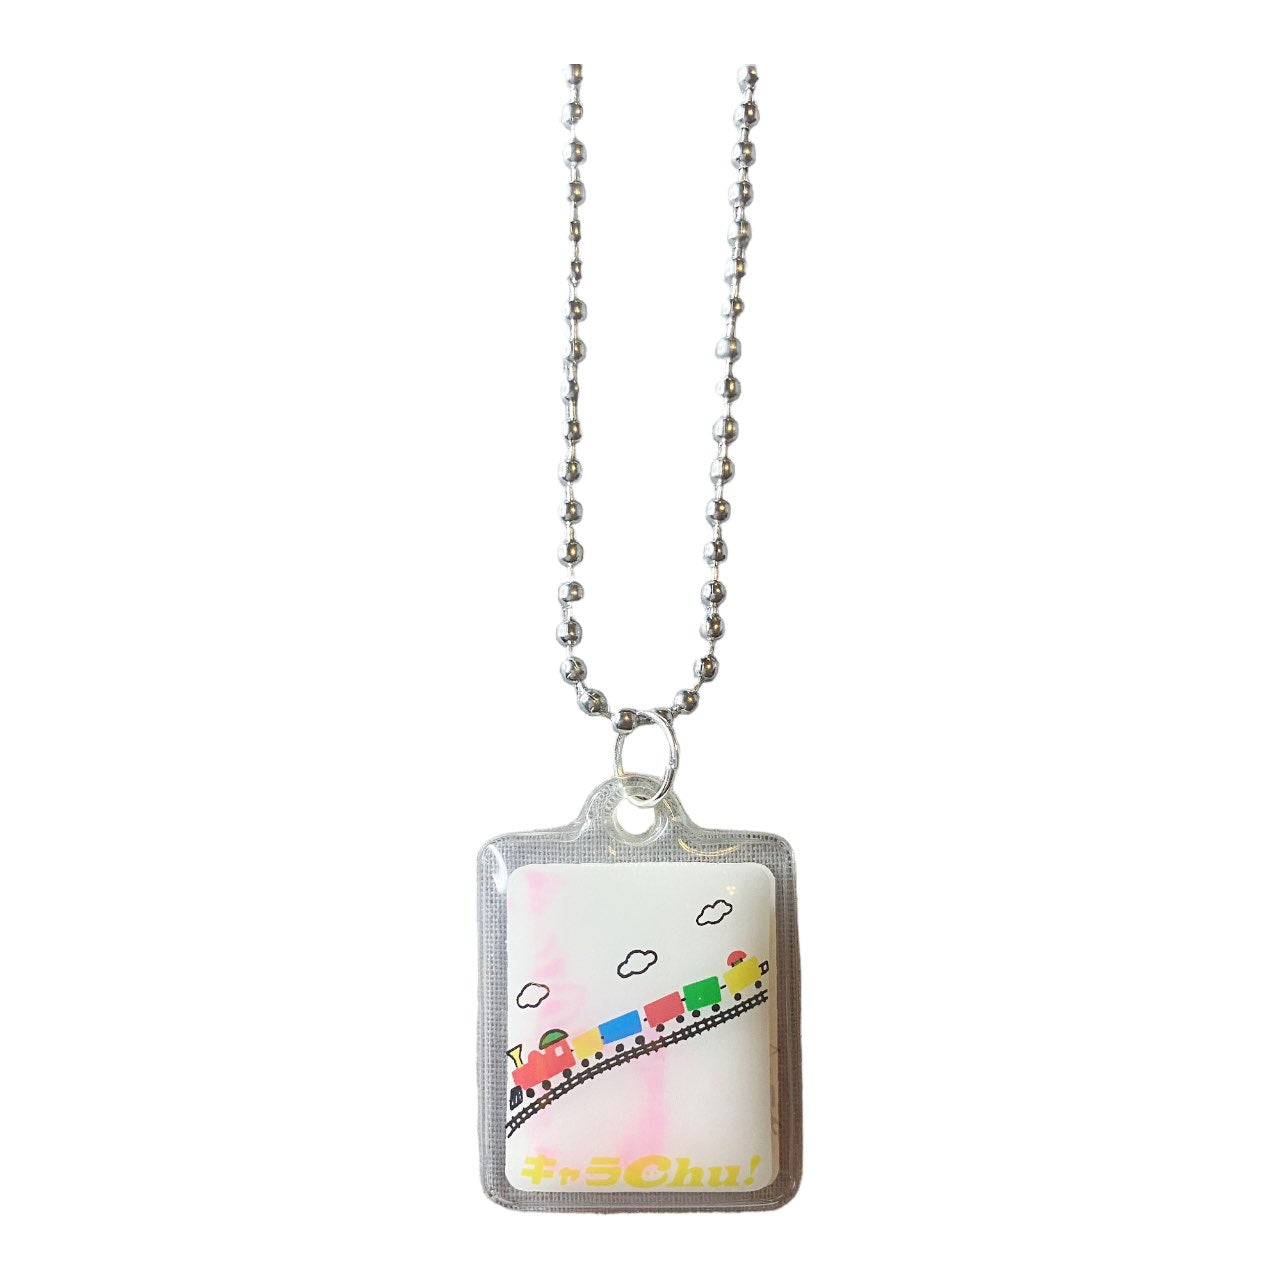 2002 Sanrio Obscure Character Pendant Necklace Train